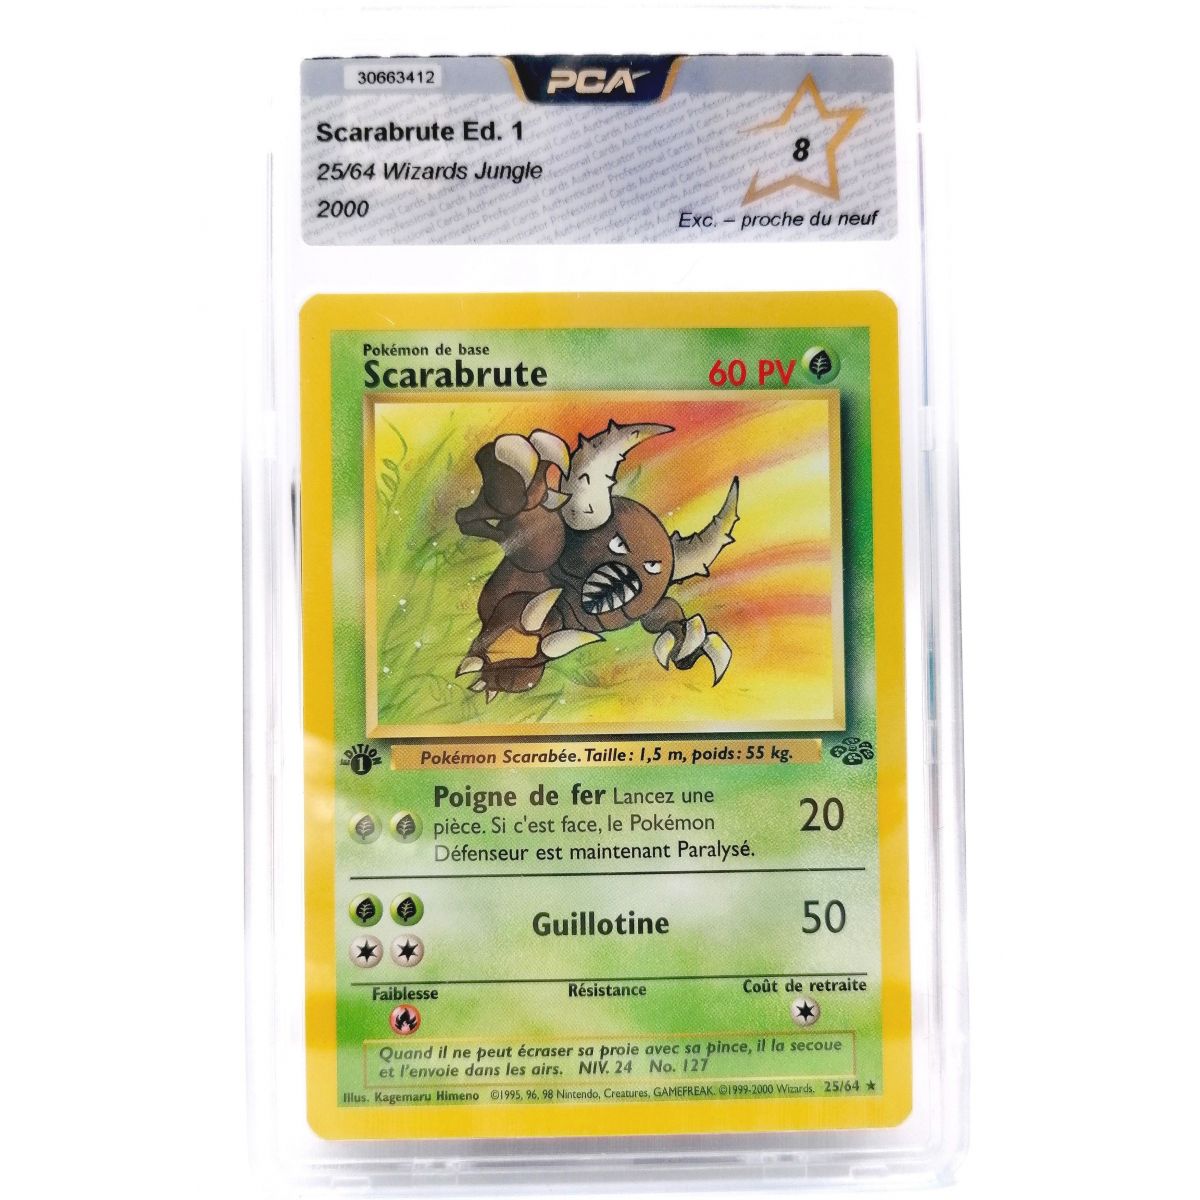 Scarabrute 25/64 Edition 1 Wizards Jungle French 1995-96-98 [PCA 8 - EXC-Near Mint]